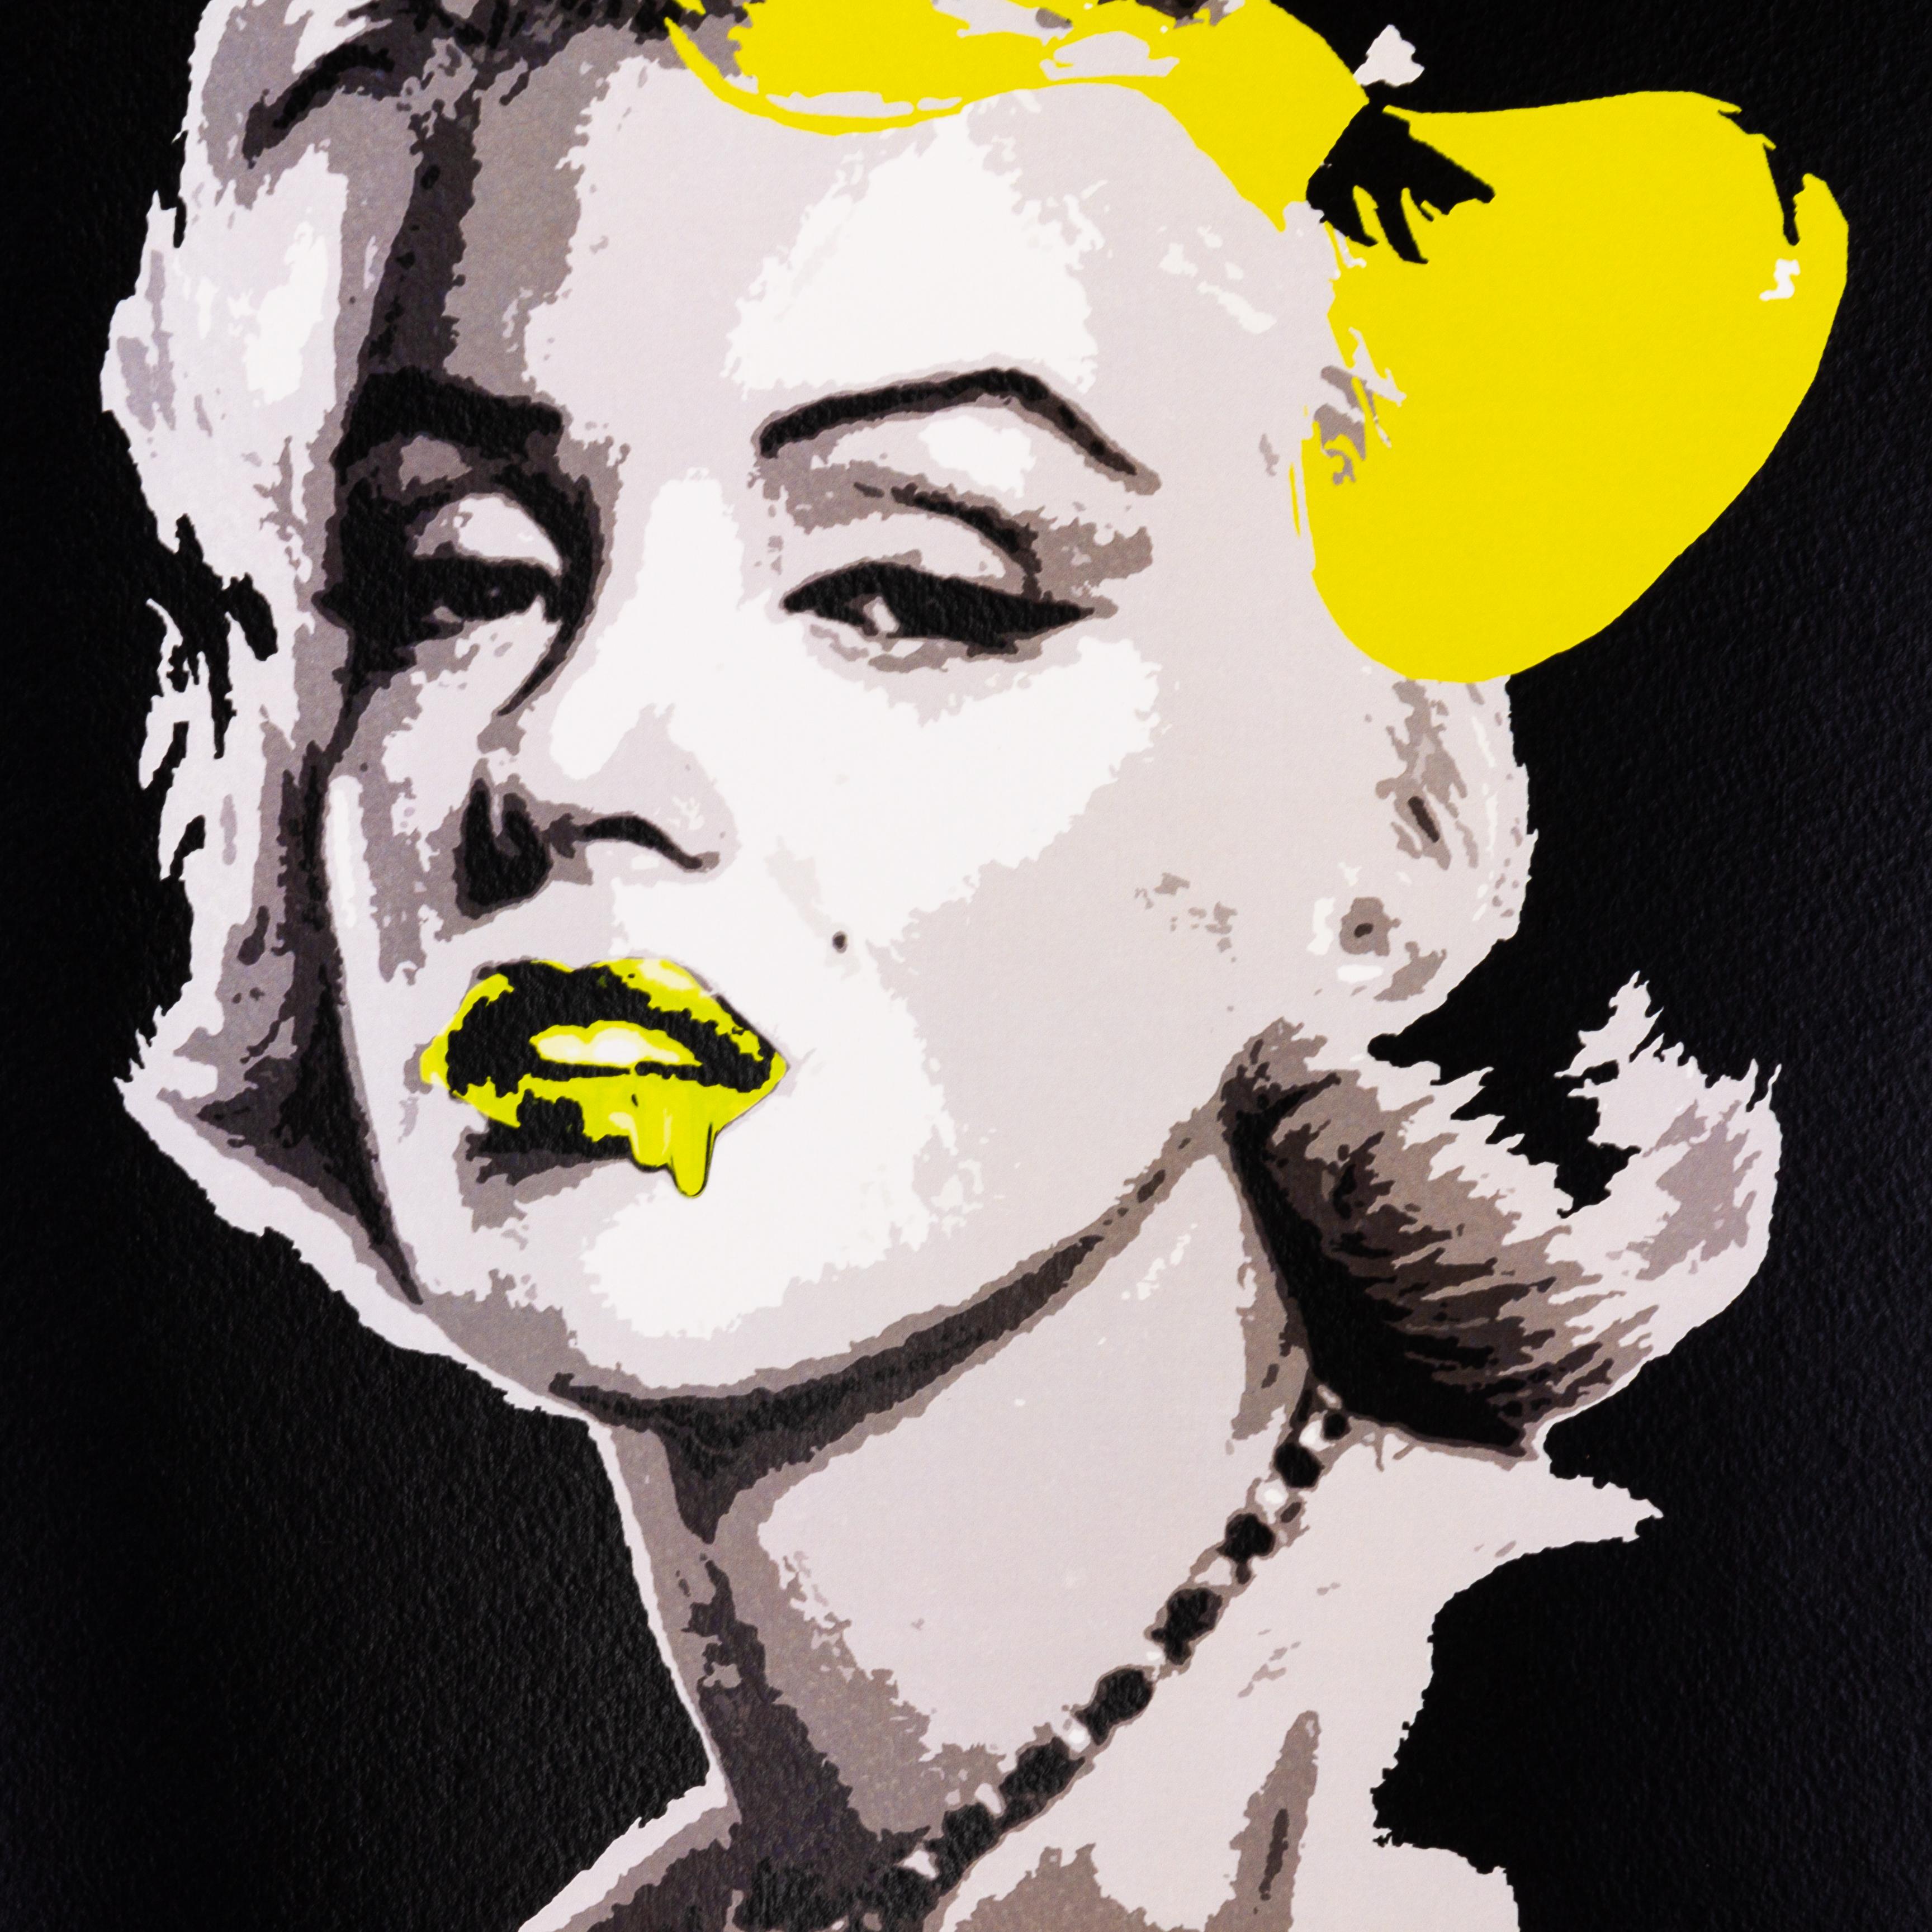 Death NYC Signed Limited Ed Pop Art Print Marilyn Monroe
From a private English collection
Free international shipping

